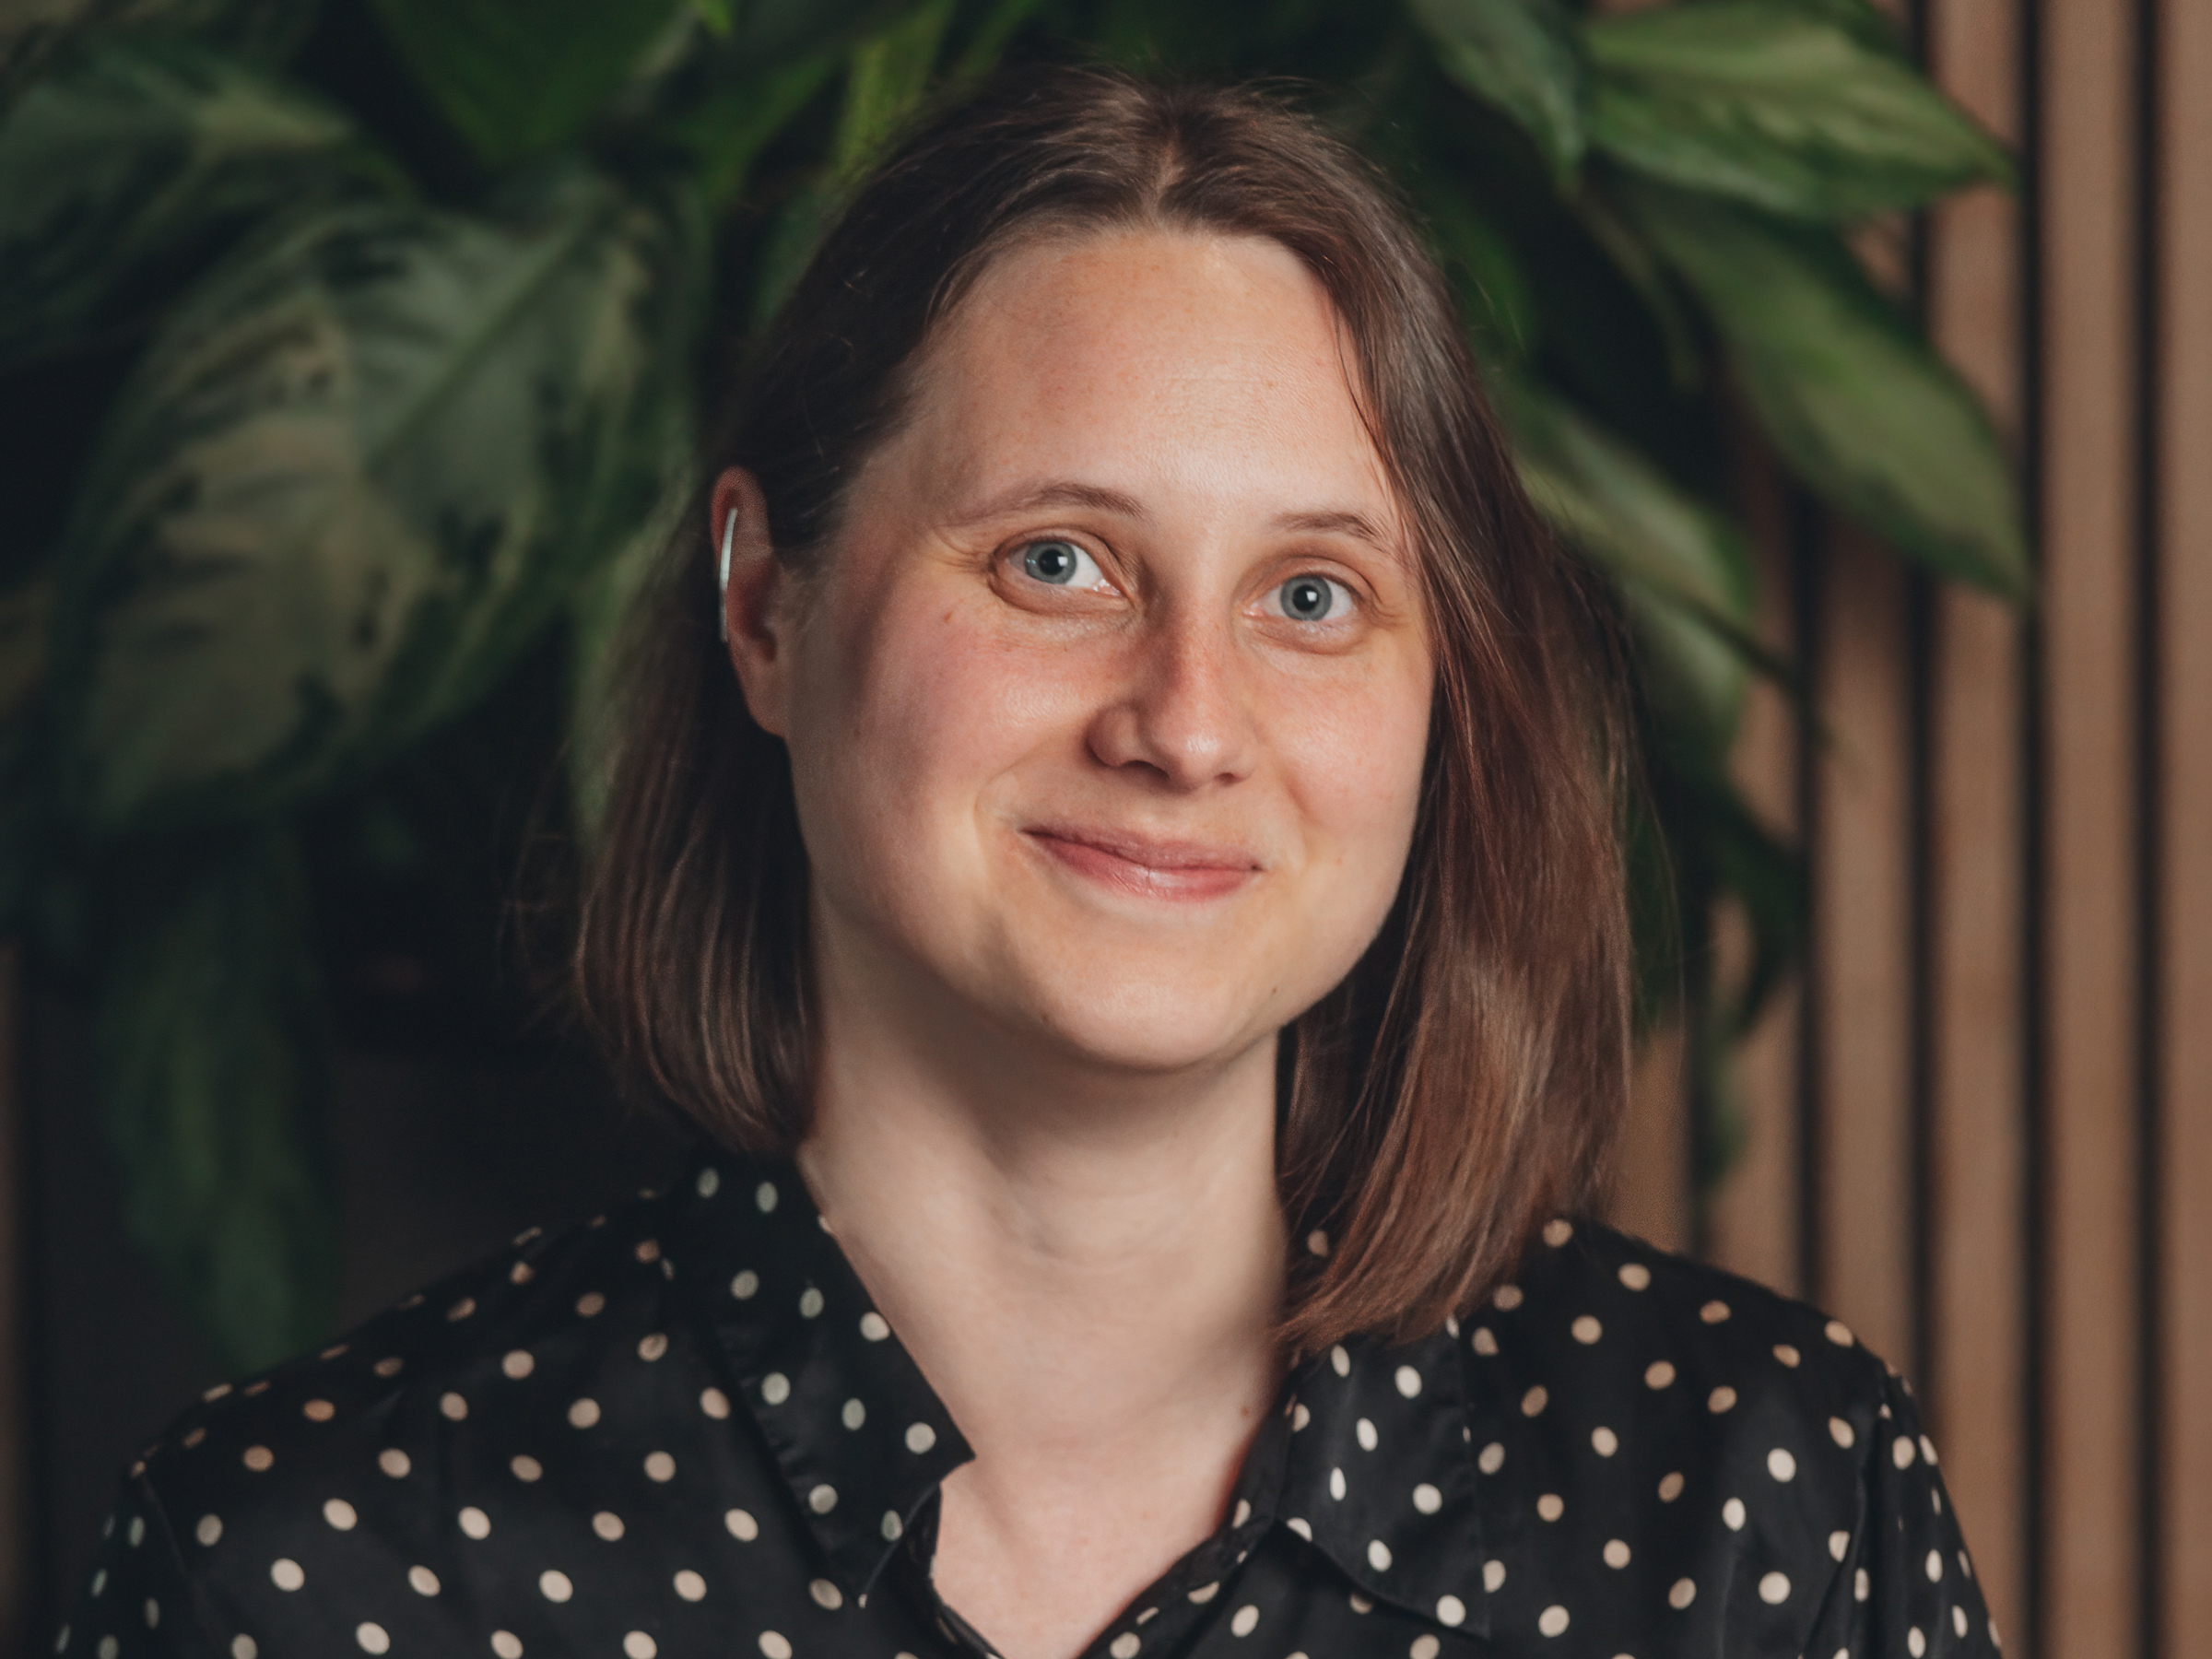 HANNAH FLORY, NORTHSTONE | Project architect for a number of Northstone neighbourhoods, each ranging from 50-500 homes. Hannah is part of the design team which develops Northstone house types and explores new sites for potential development.